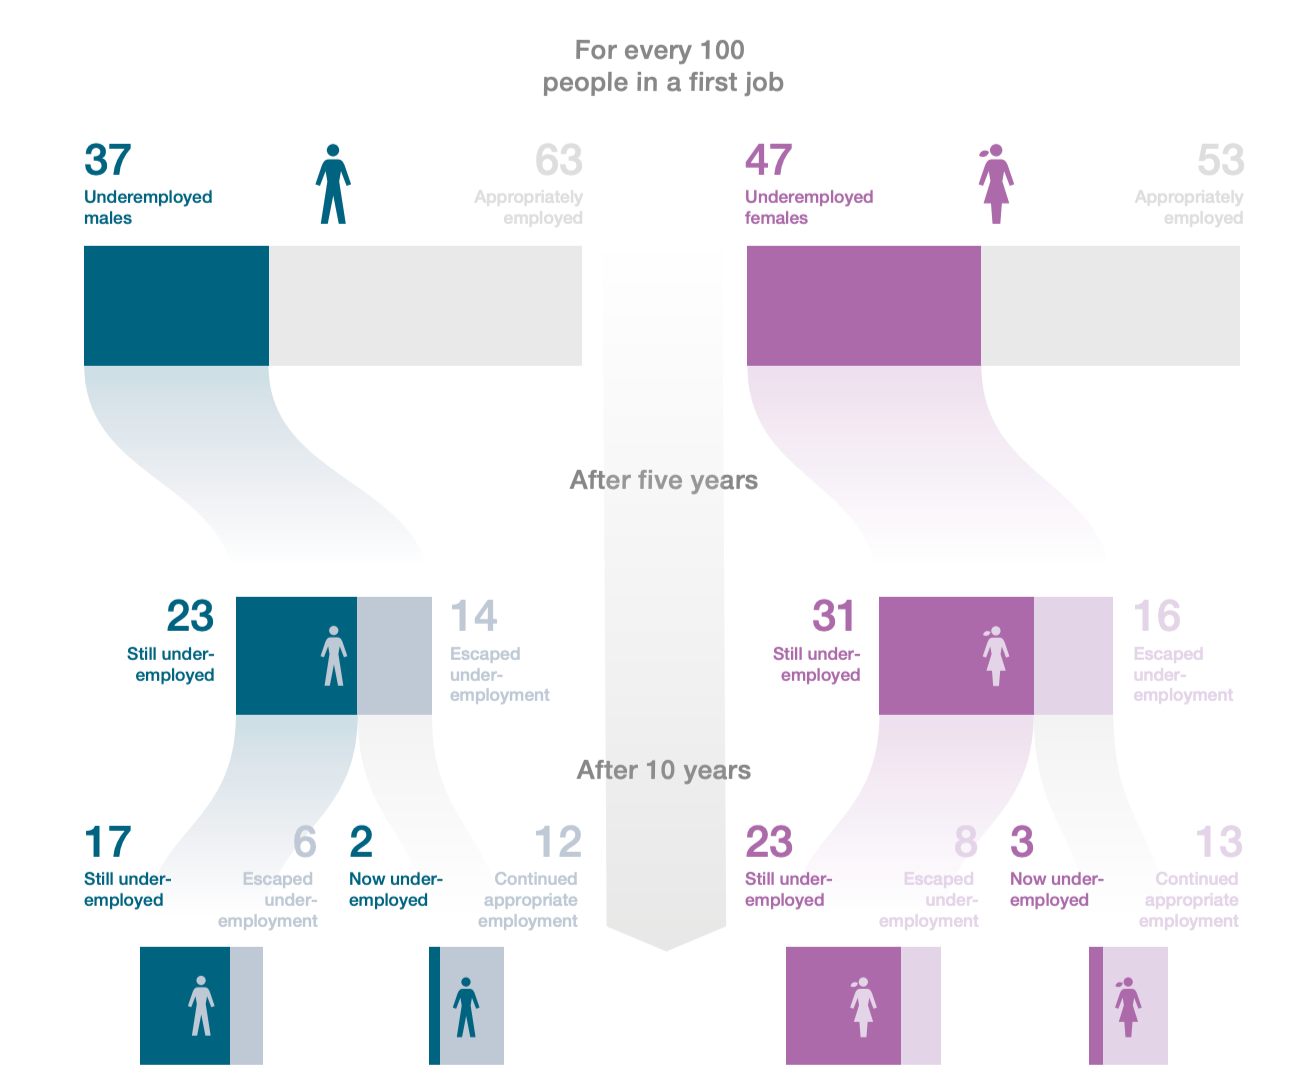 Visualization comparing male and female graduates' underemployment rates over ten years